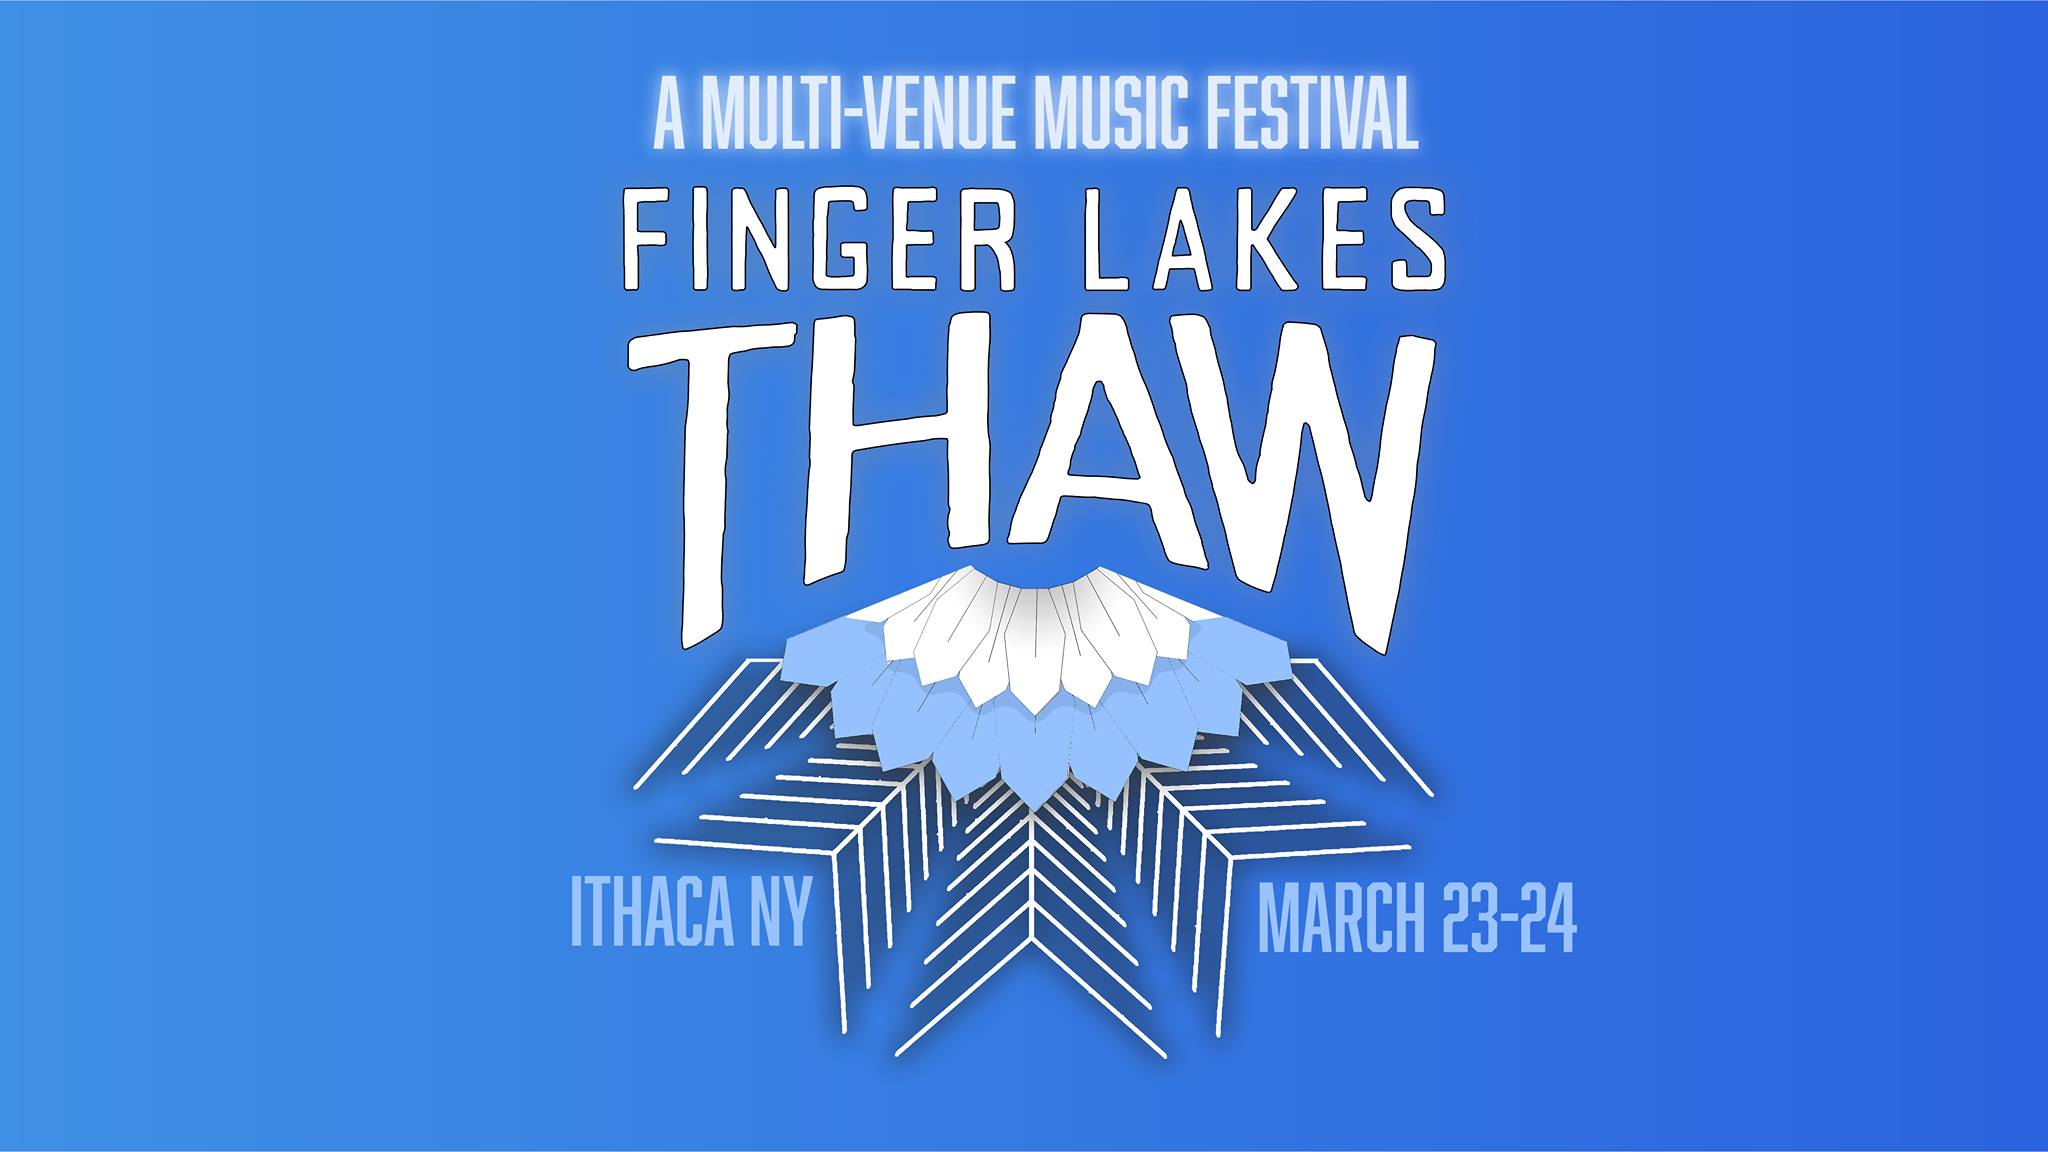 Finger Lakes Thaw Festival Ithaca The Range live music twithaca ithaca commons downtown